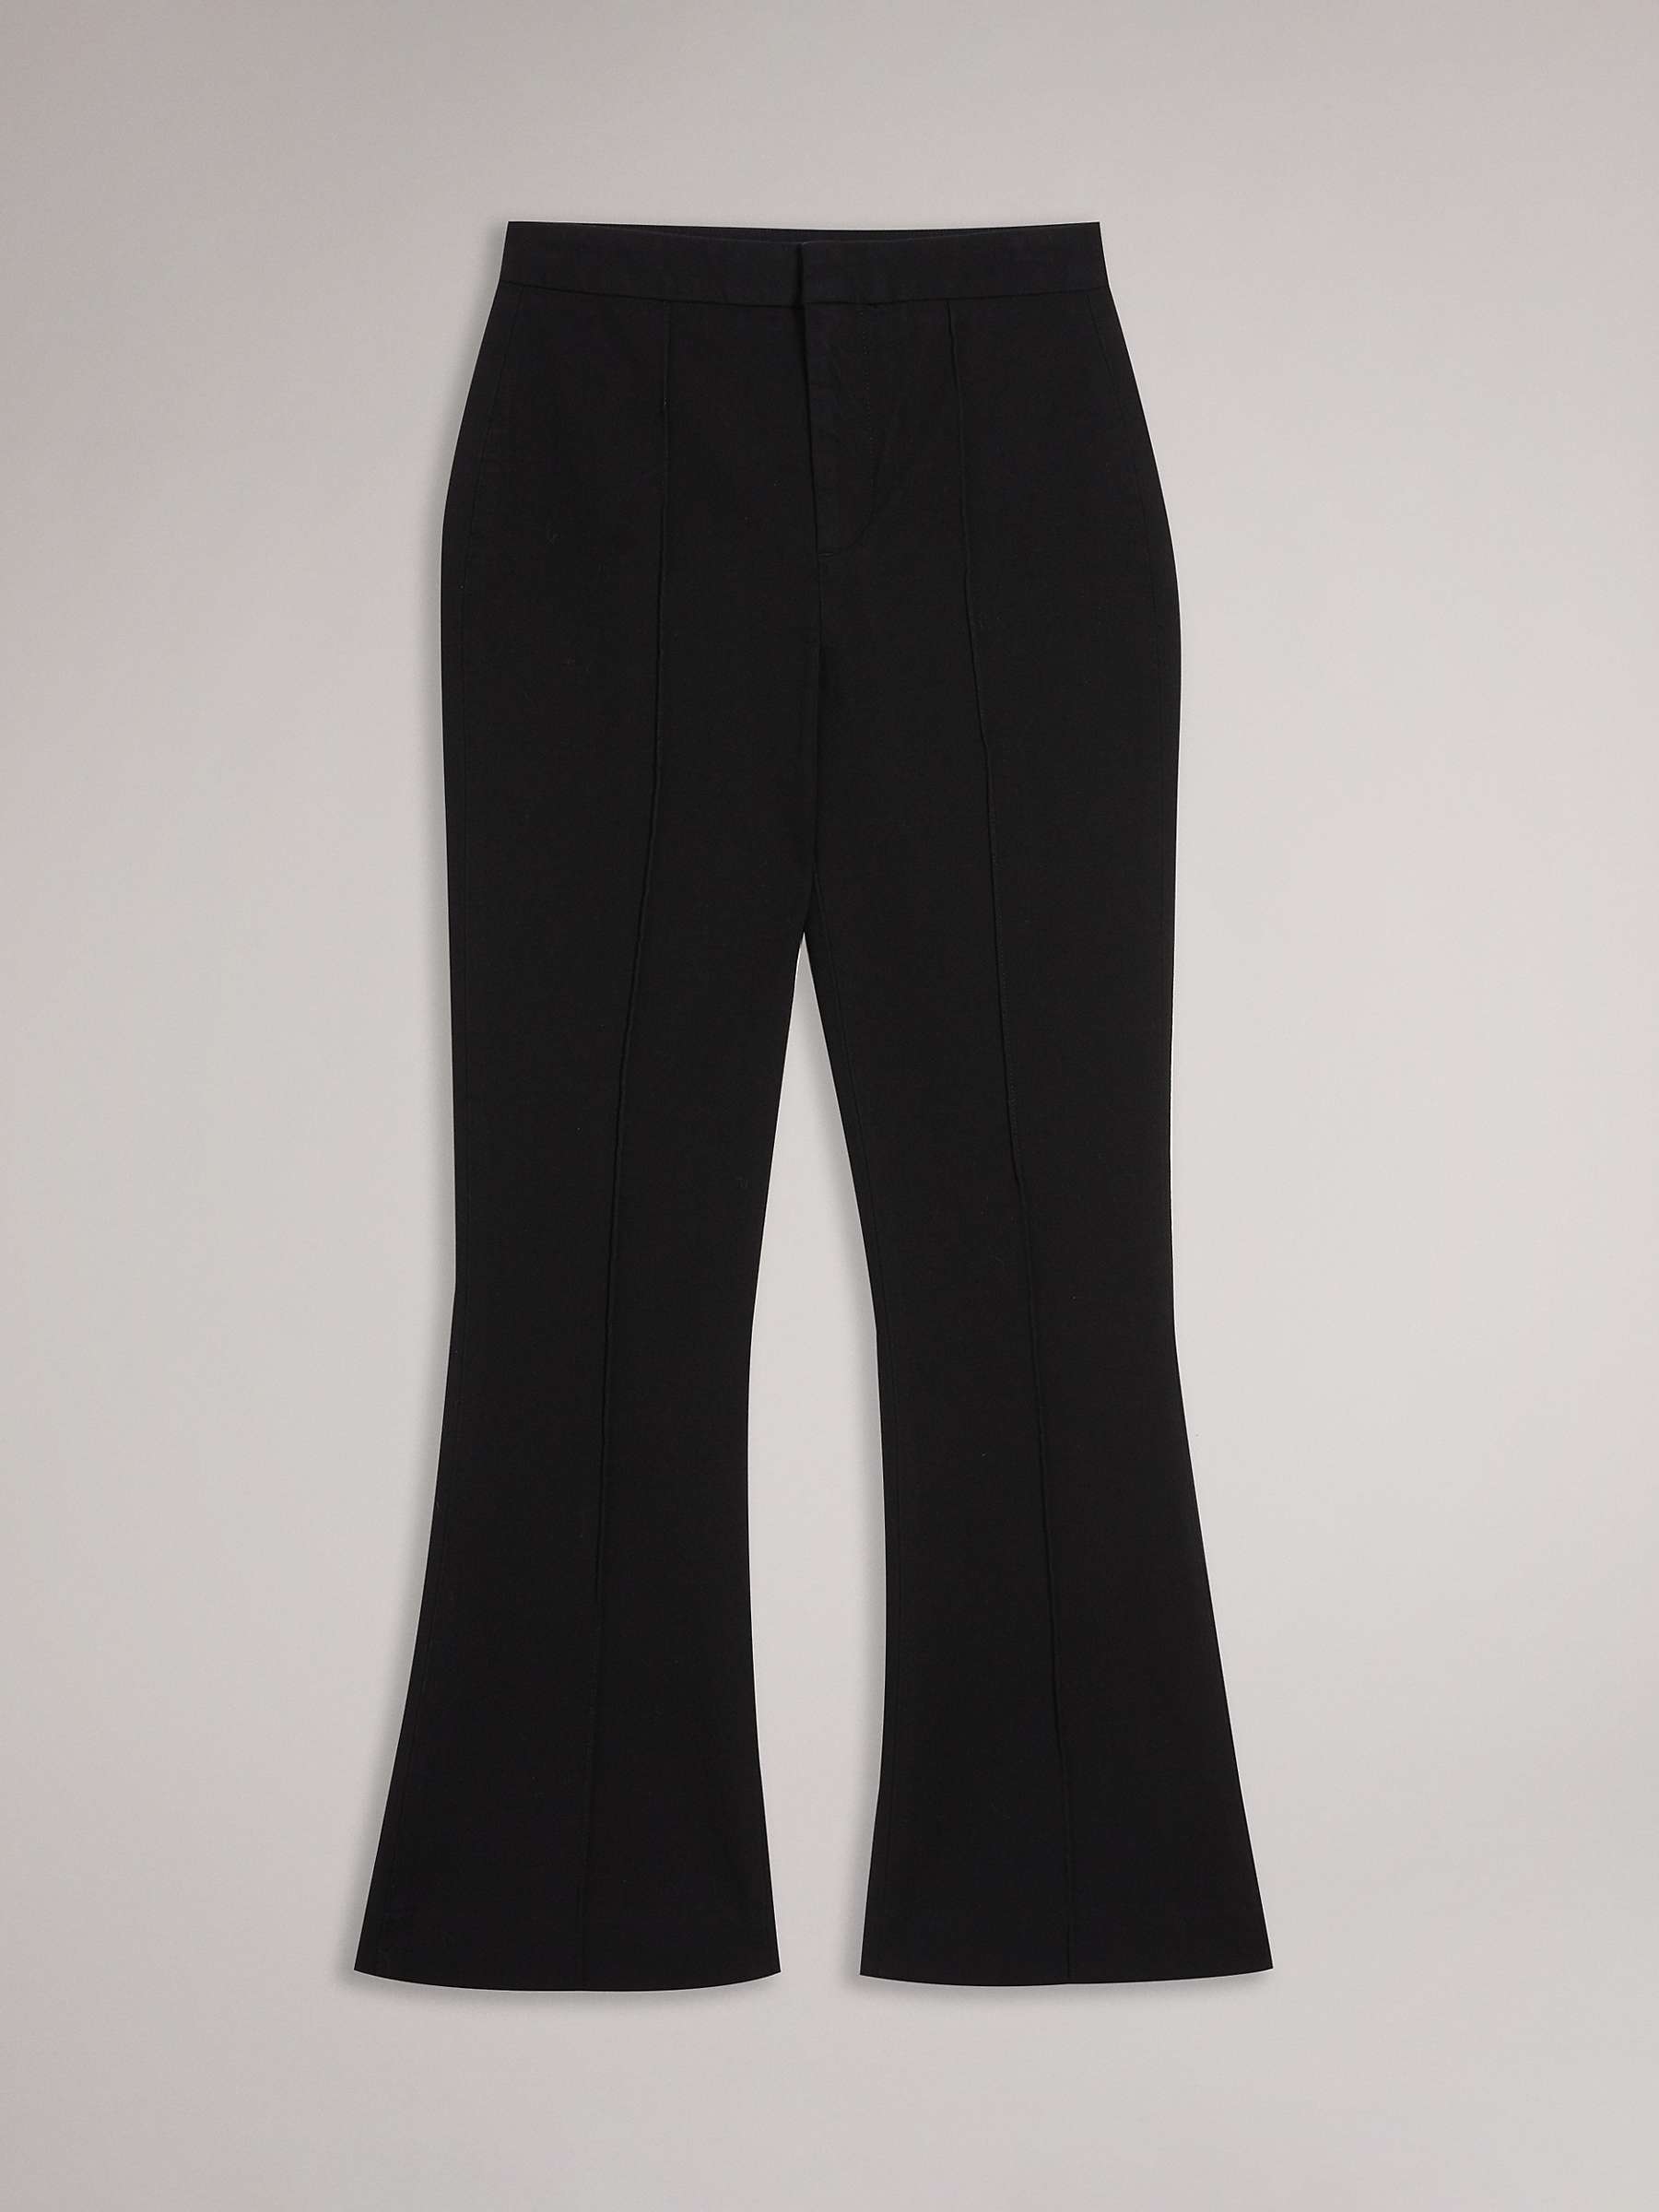 Buy Ted Baker Belenah High Waisted Slim Fit Kick Flare Trousers, Black Online at johnlewis.com